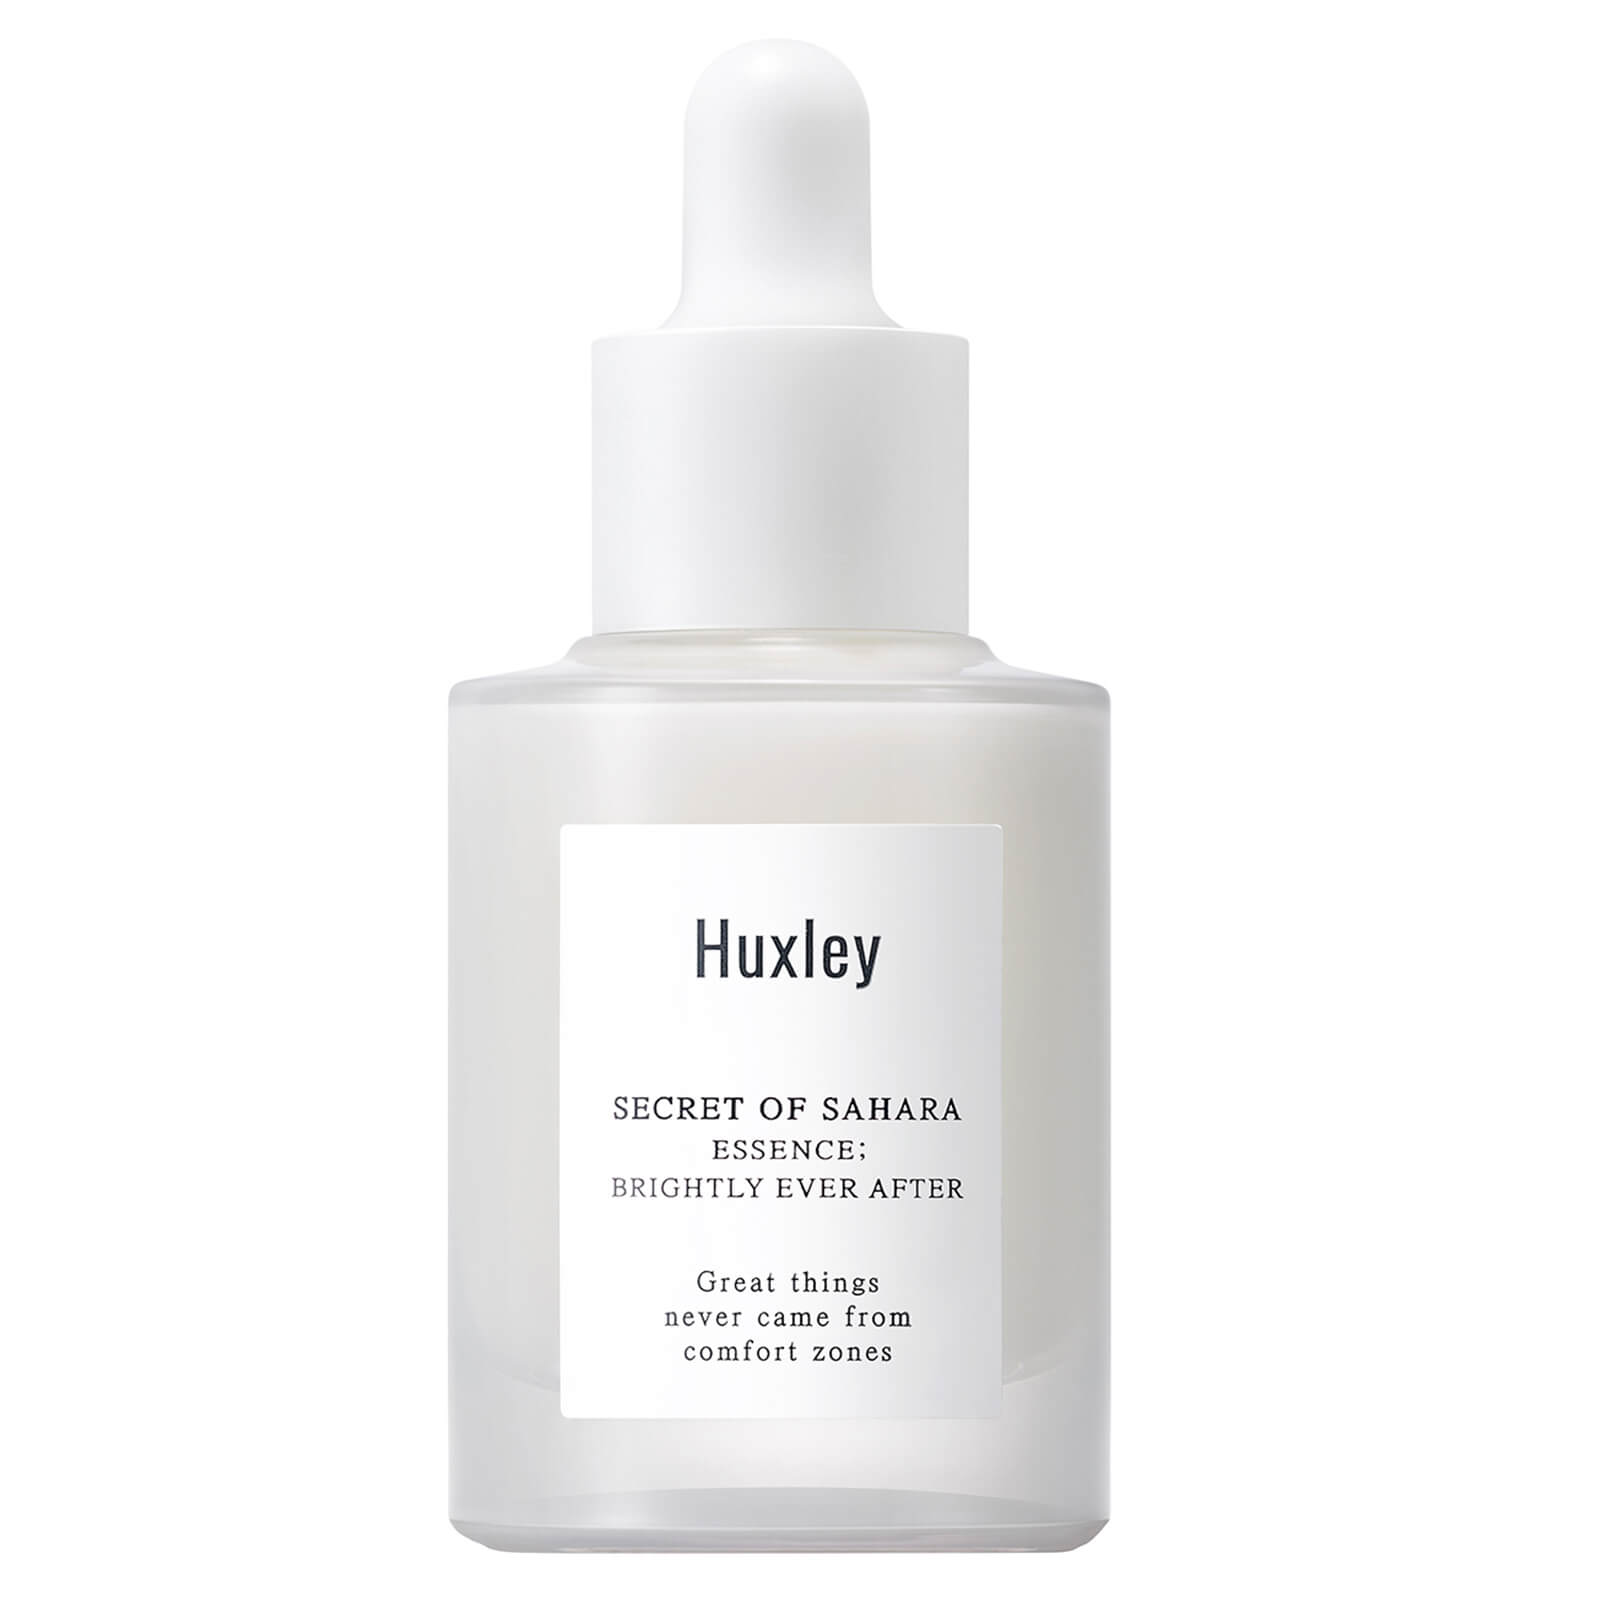 Huxley Brightly Ever After Essence 30ml